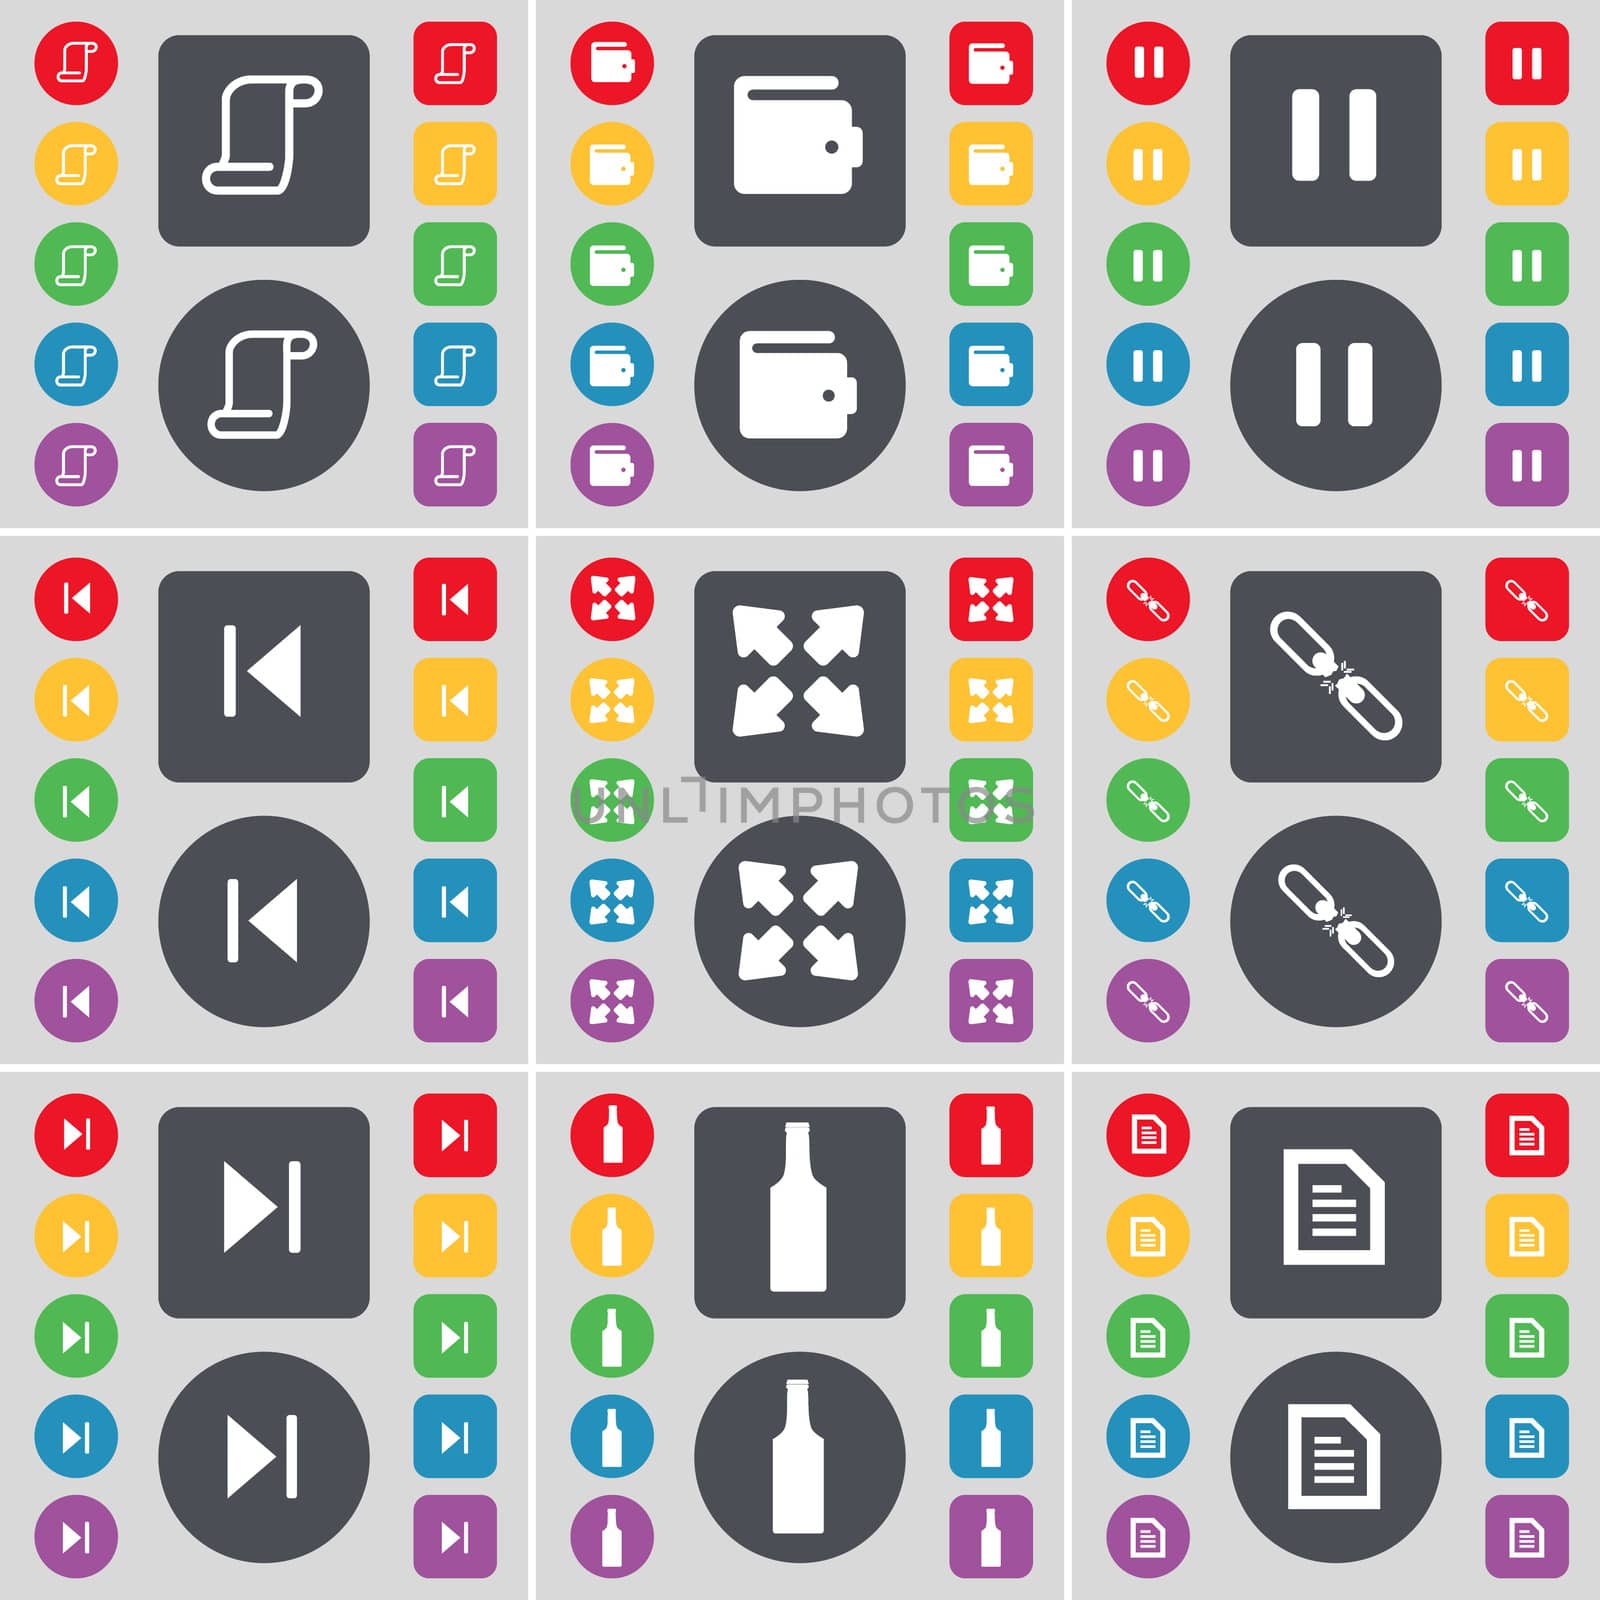 Scroll, Wallet, Pause, Media skip, Full screen, Link, Media skip, Bottle, Text file icon symbol. A large set of flat, colored buttons for your design.  by serhii_lohvyniuk